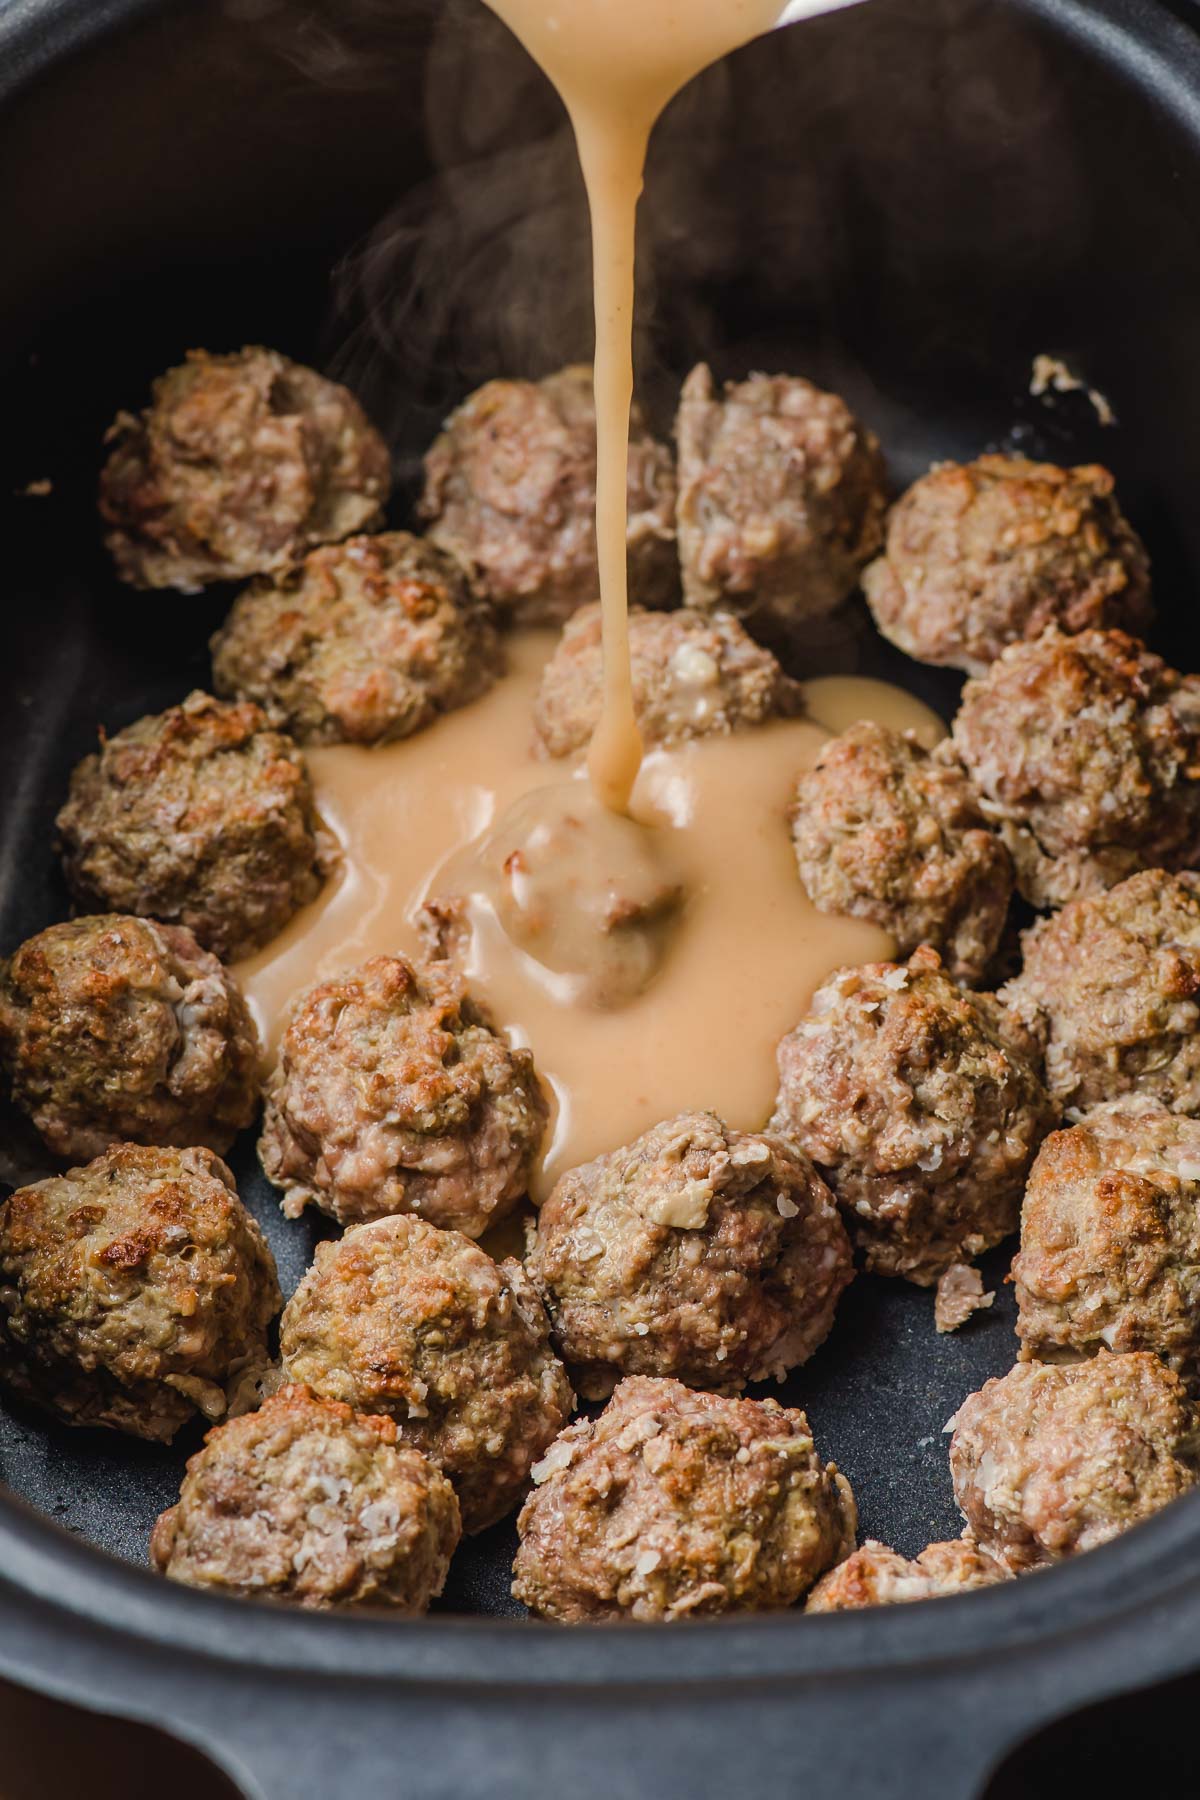 Gravy being poured over meatballs in a slow cooker.